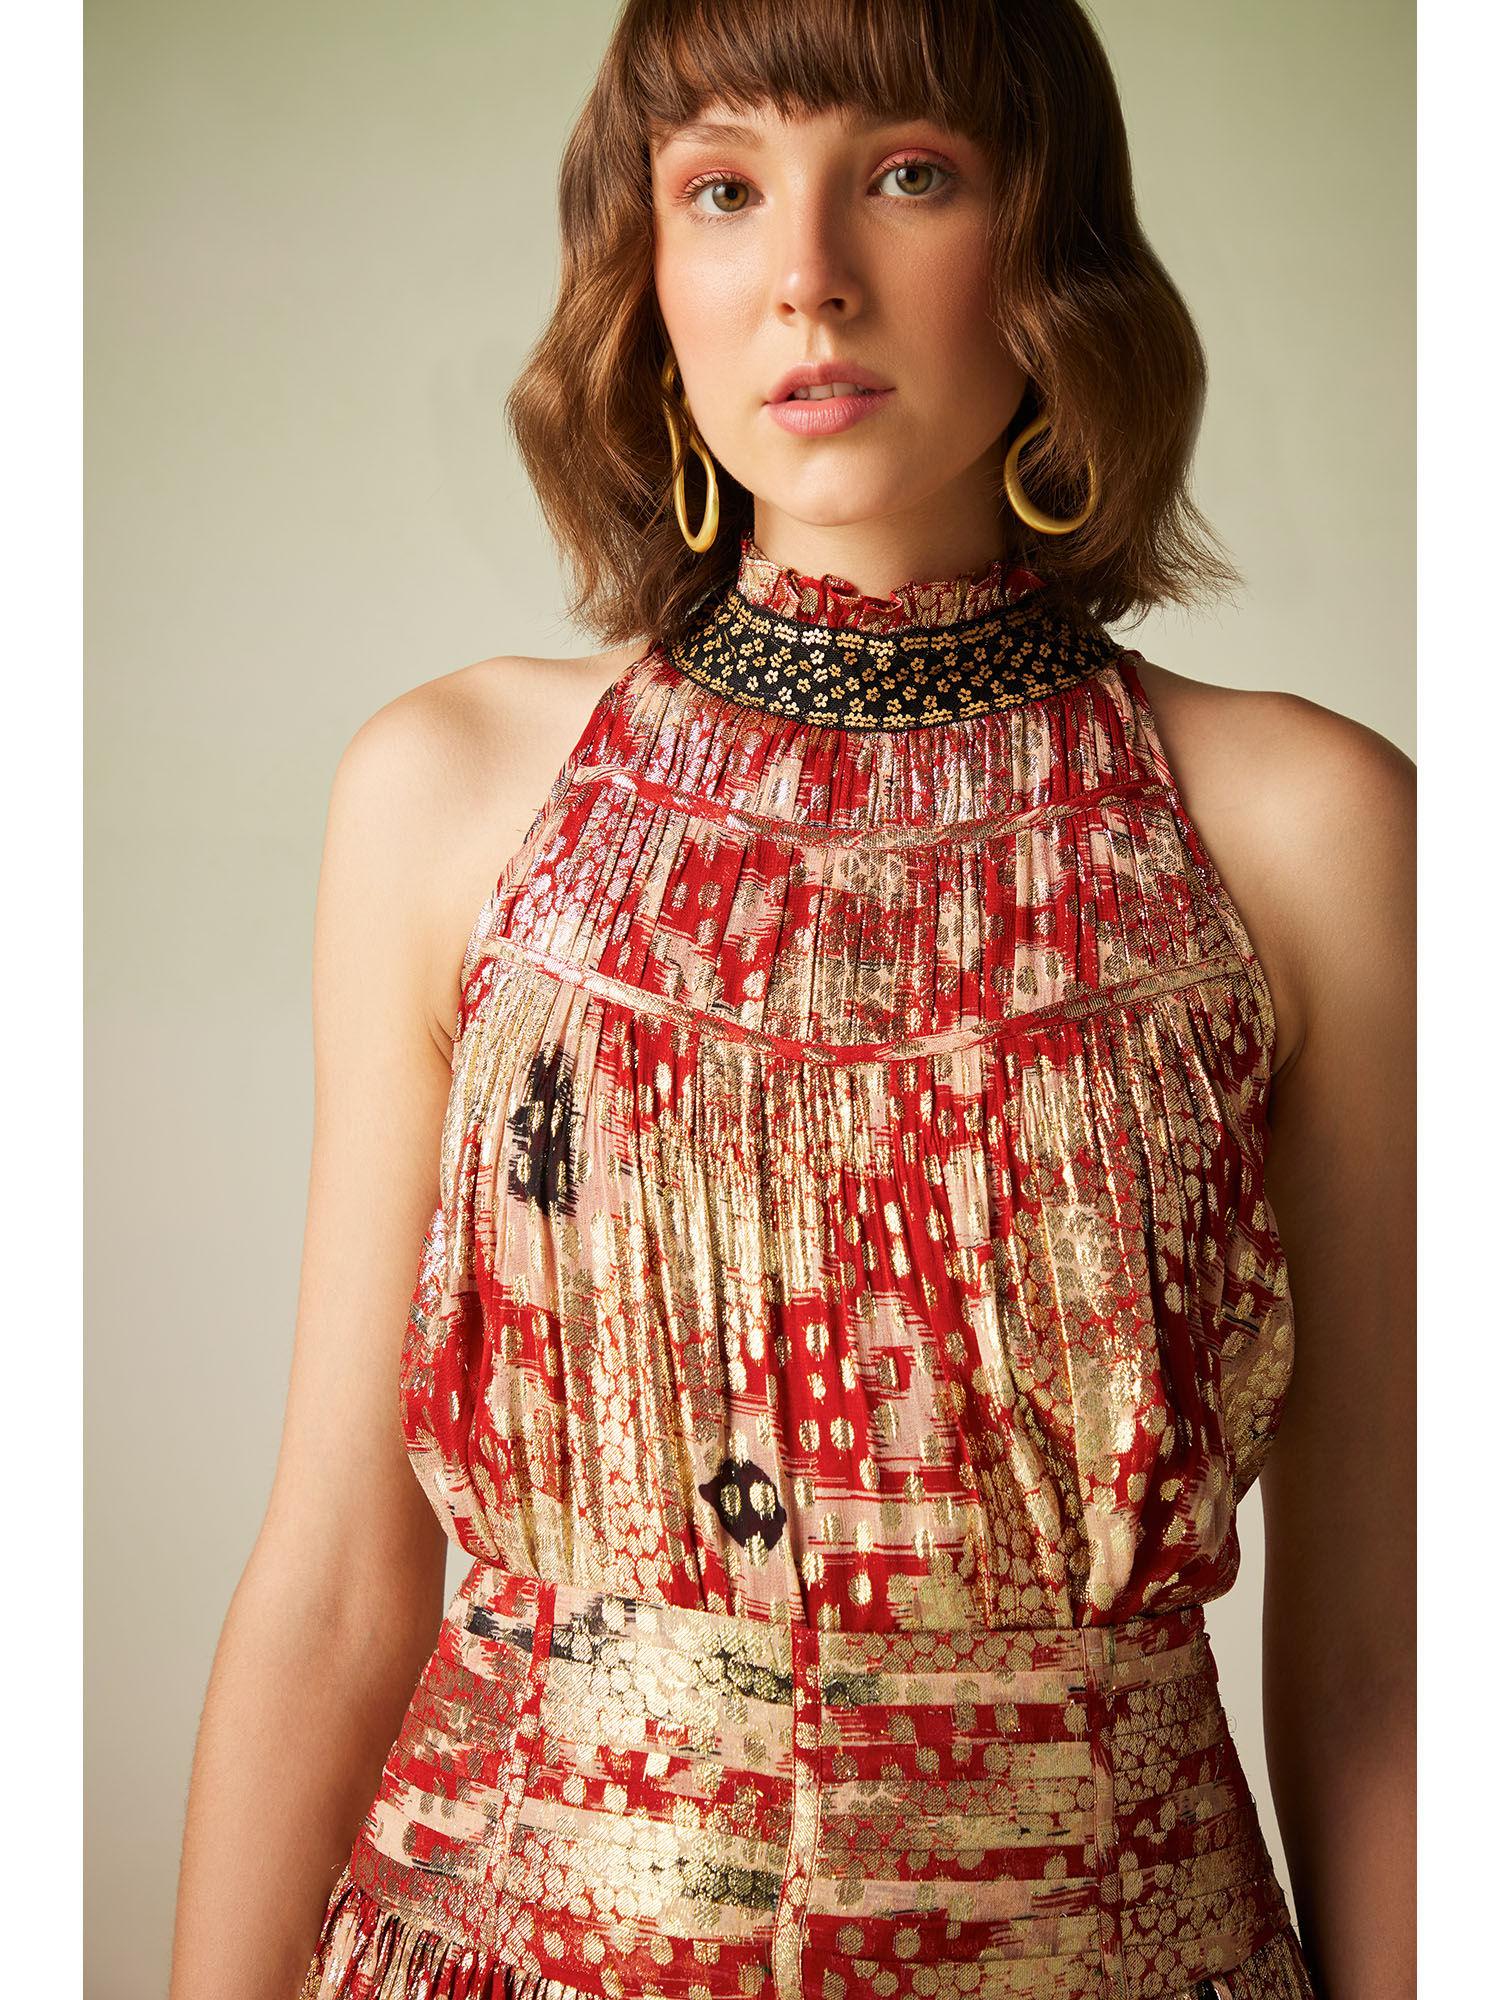 multi-color printed top with lace detailing on neckline